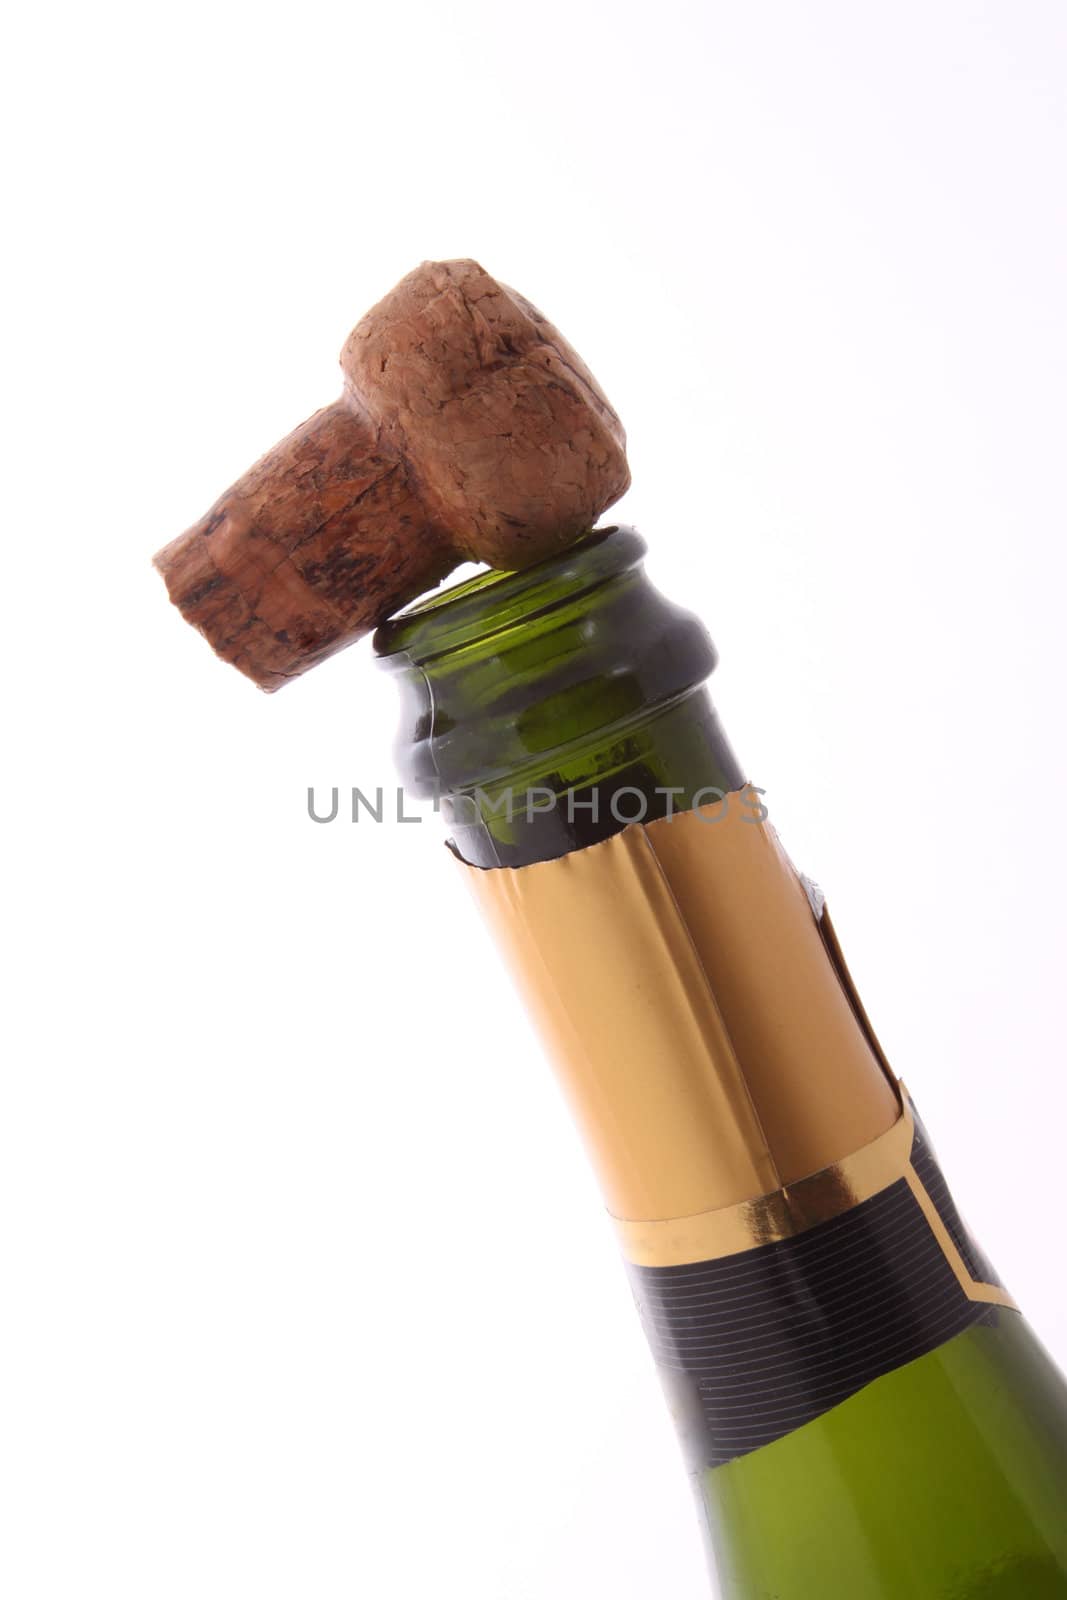 Champagne bottle and cork  on a plain white background.